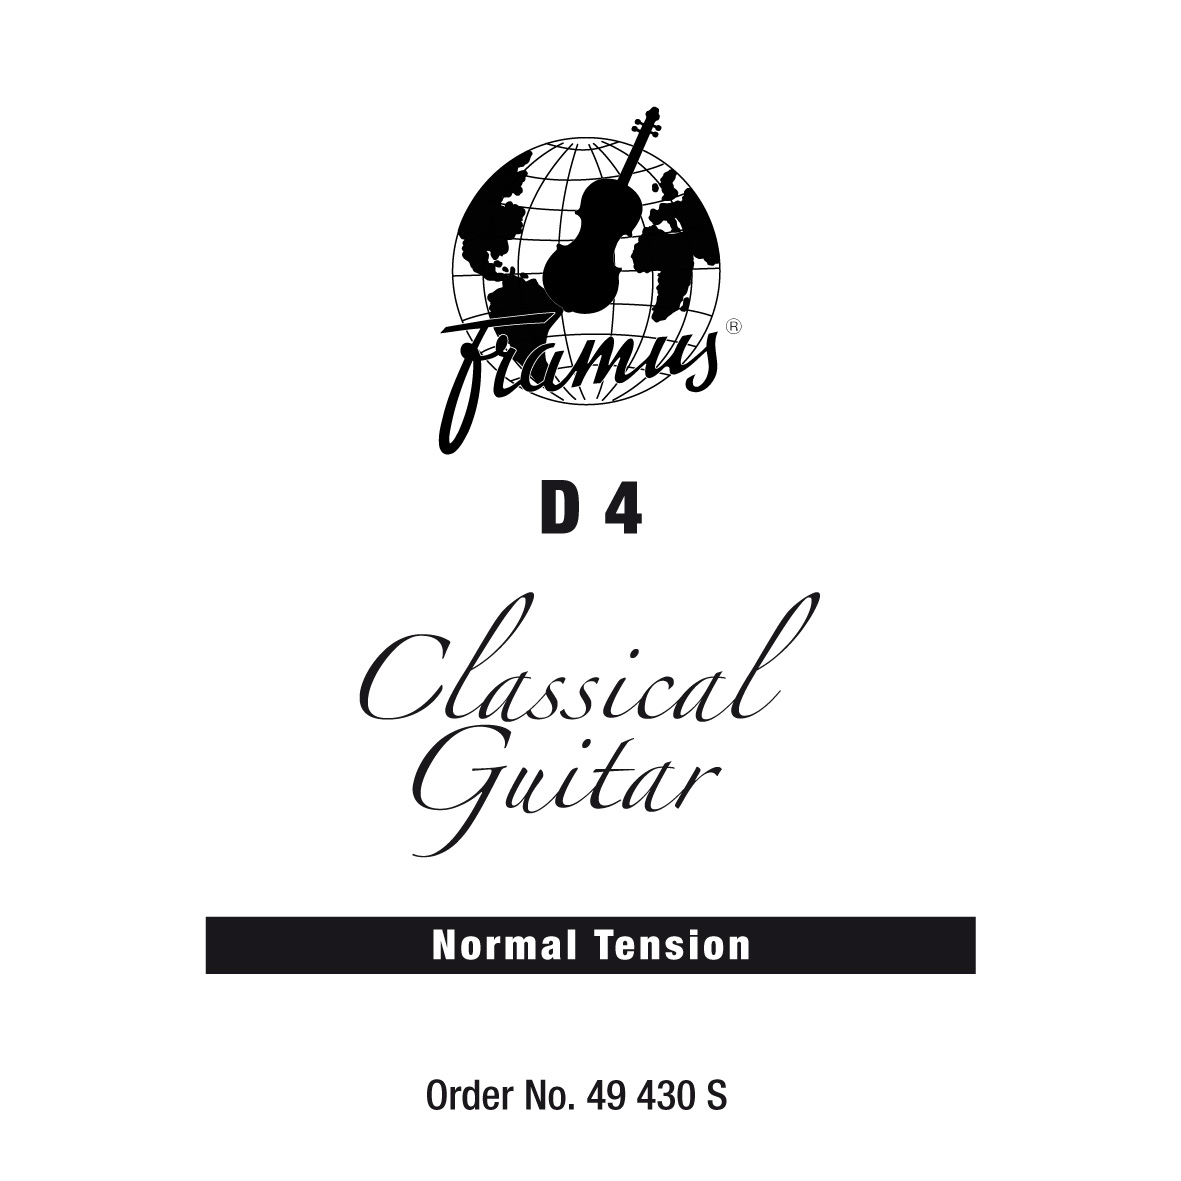 Framus Classic - Classical Guitar Single String, D 4, .030, wound, Normal Tension